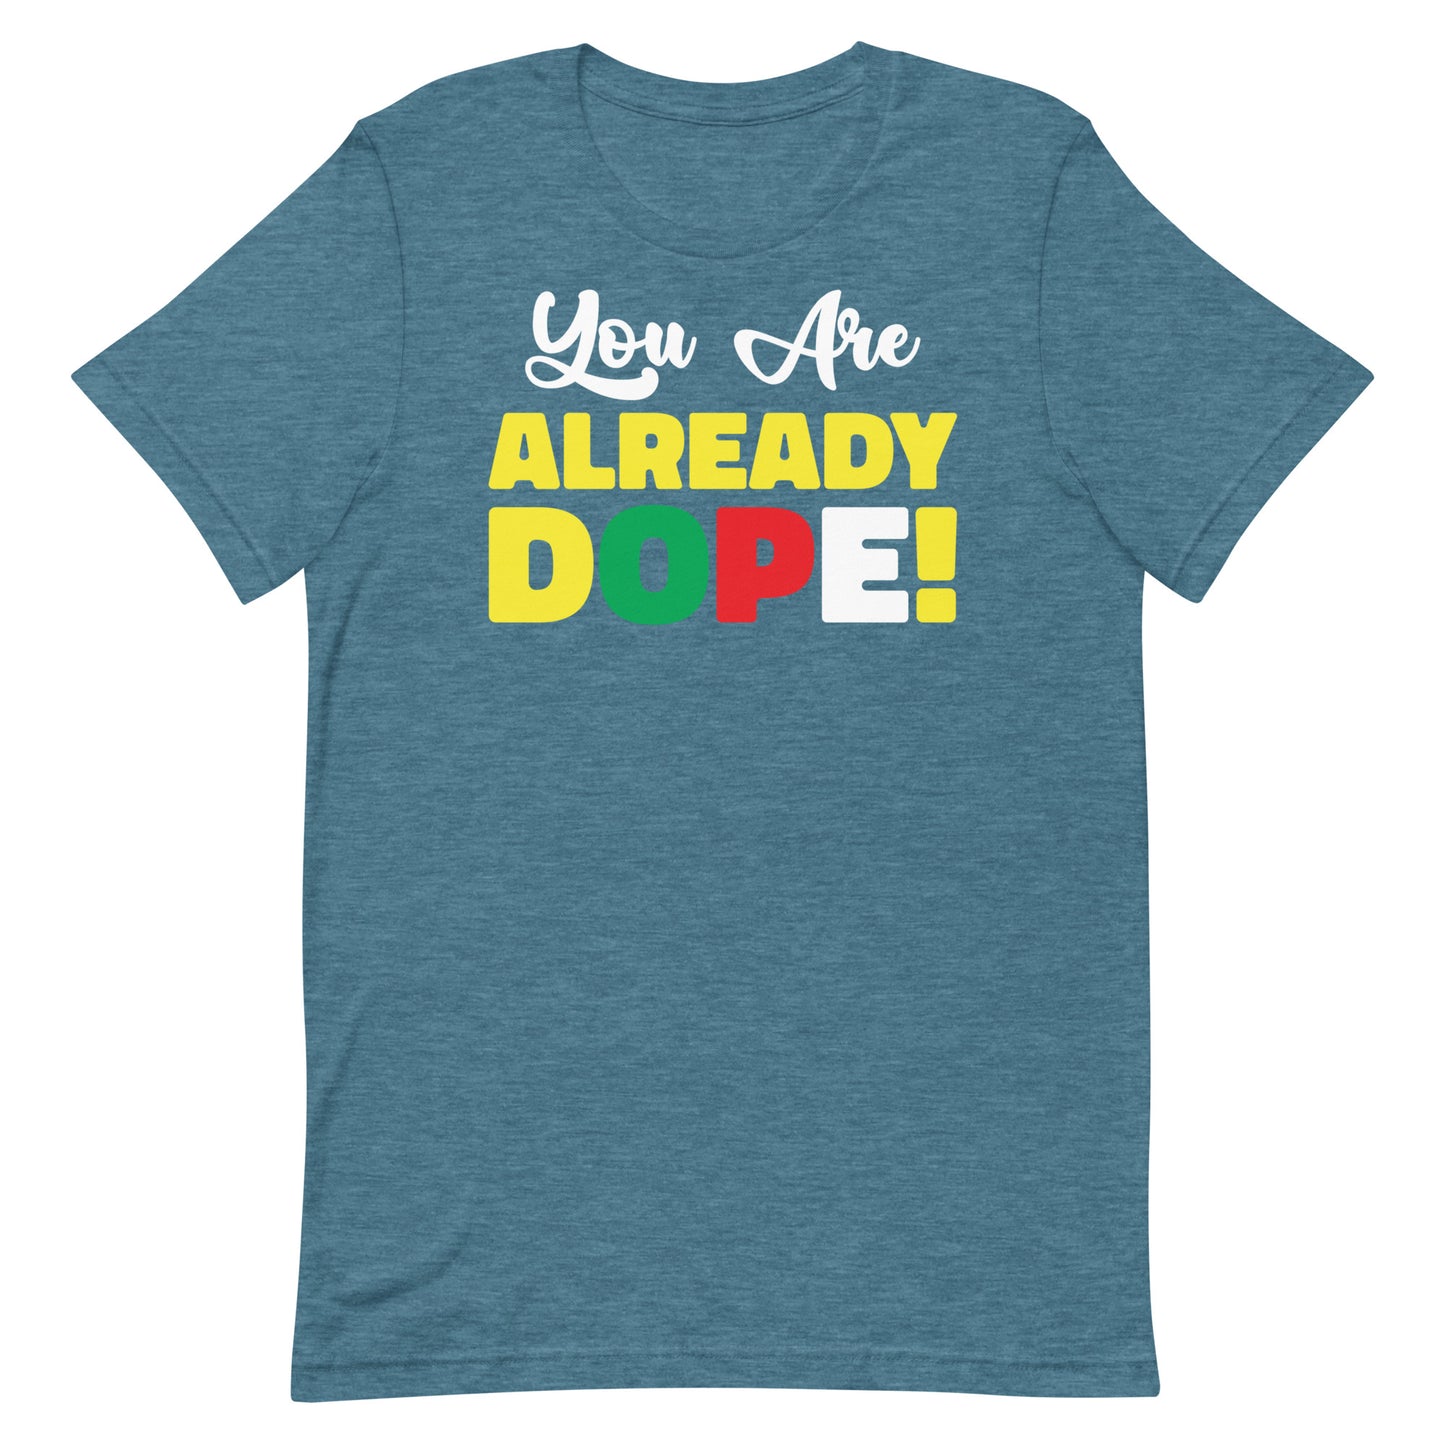 You are Already DOPE! T-Shirt